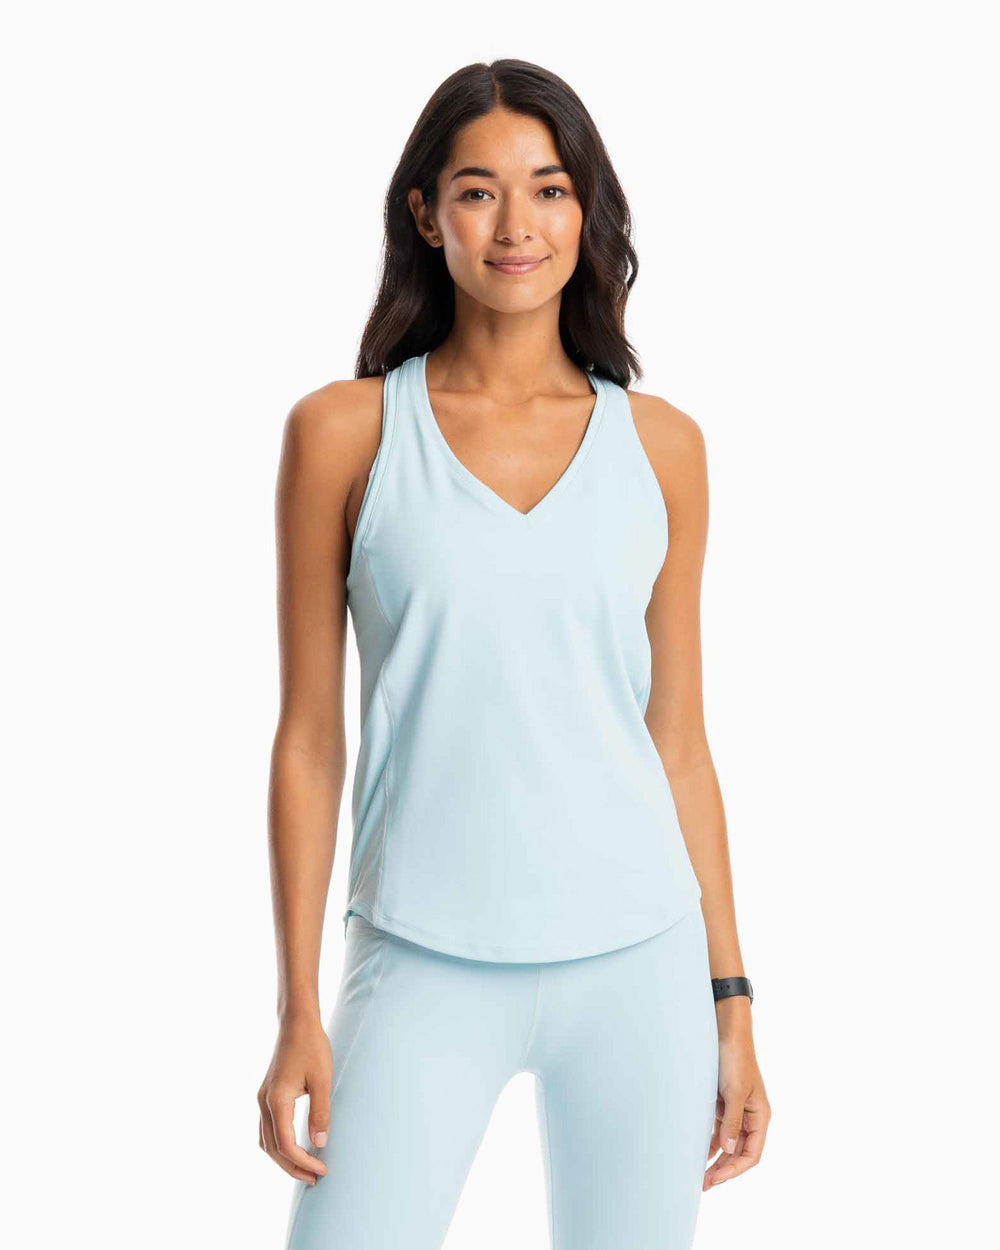 The model front view of the Women's Nelli Skip Stripe Tank Top by Southern Tide - Wake Blue